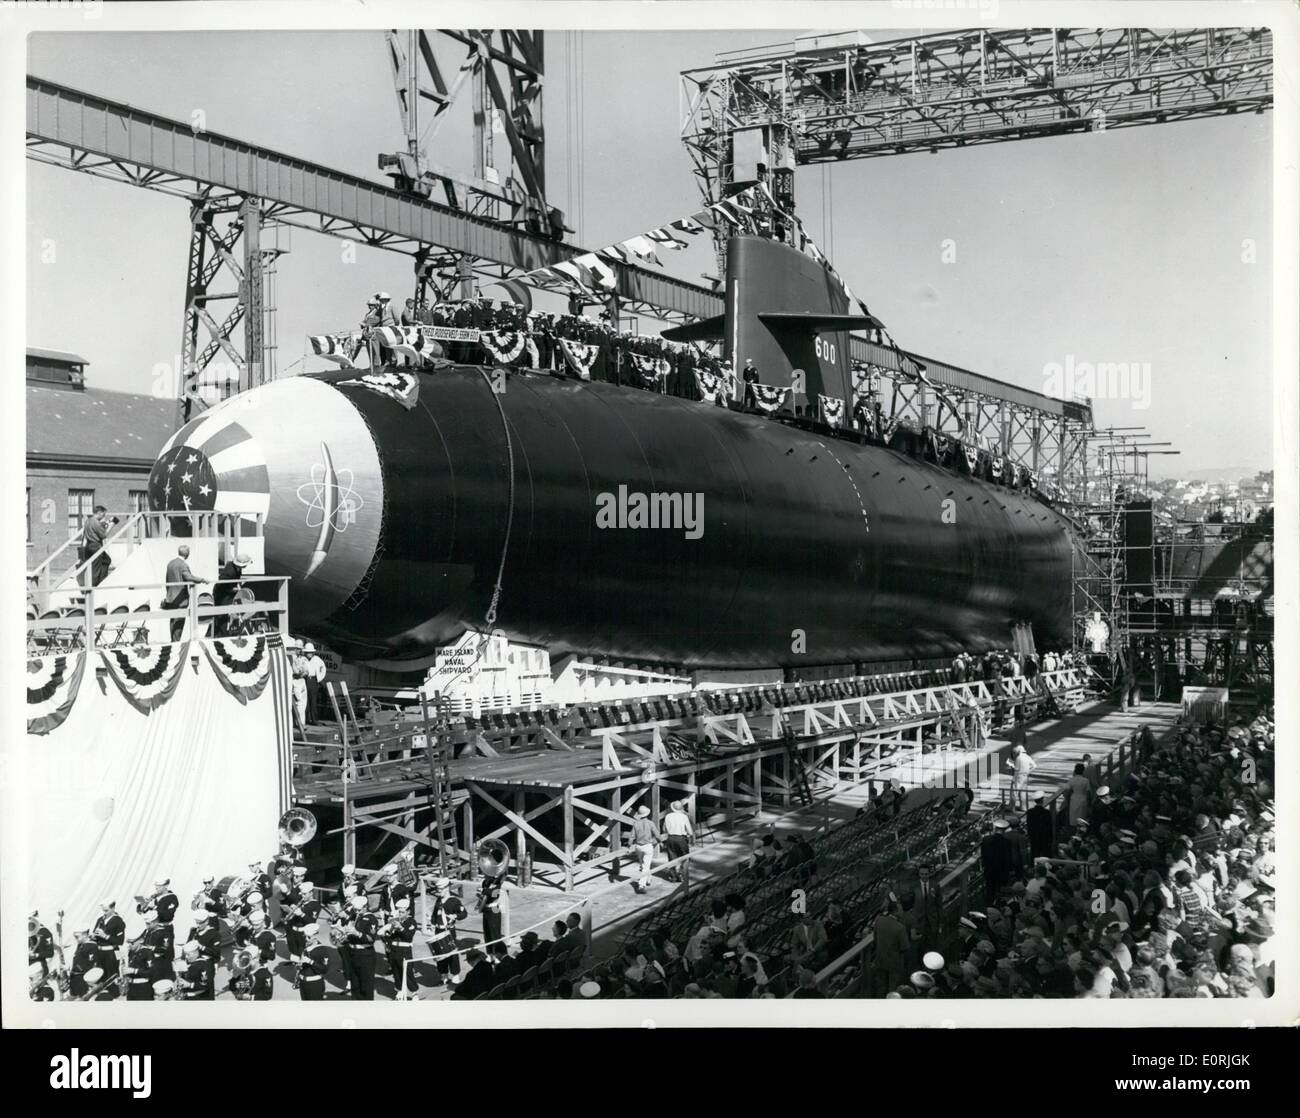 Oct. 10, 1959 - U.S. Navy Launches third Polaris Submarine: The U.S. Navy's third fleet Ballistic Missile Submarine Theodore Roosevelt (SSB) (N) 600) is shown during launched ceremonies at mar island naval shipyard, Vallejo, California, October 3,1959. The Theodore Roosevelt is Designed to fire the Polaris Missile while surfaced or submerged . The Nuclear powered vessel is 380 feet long and has Submerged displacement weight of 6,7000 tons. Mrs. Alice Roosevelt Longworth of Washington, D.C. Daughter of Theodore Roosevelt, Christined the Ship named for her father. She was attended by Mrs Stock Photo